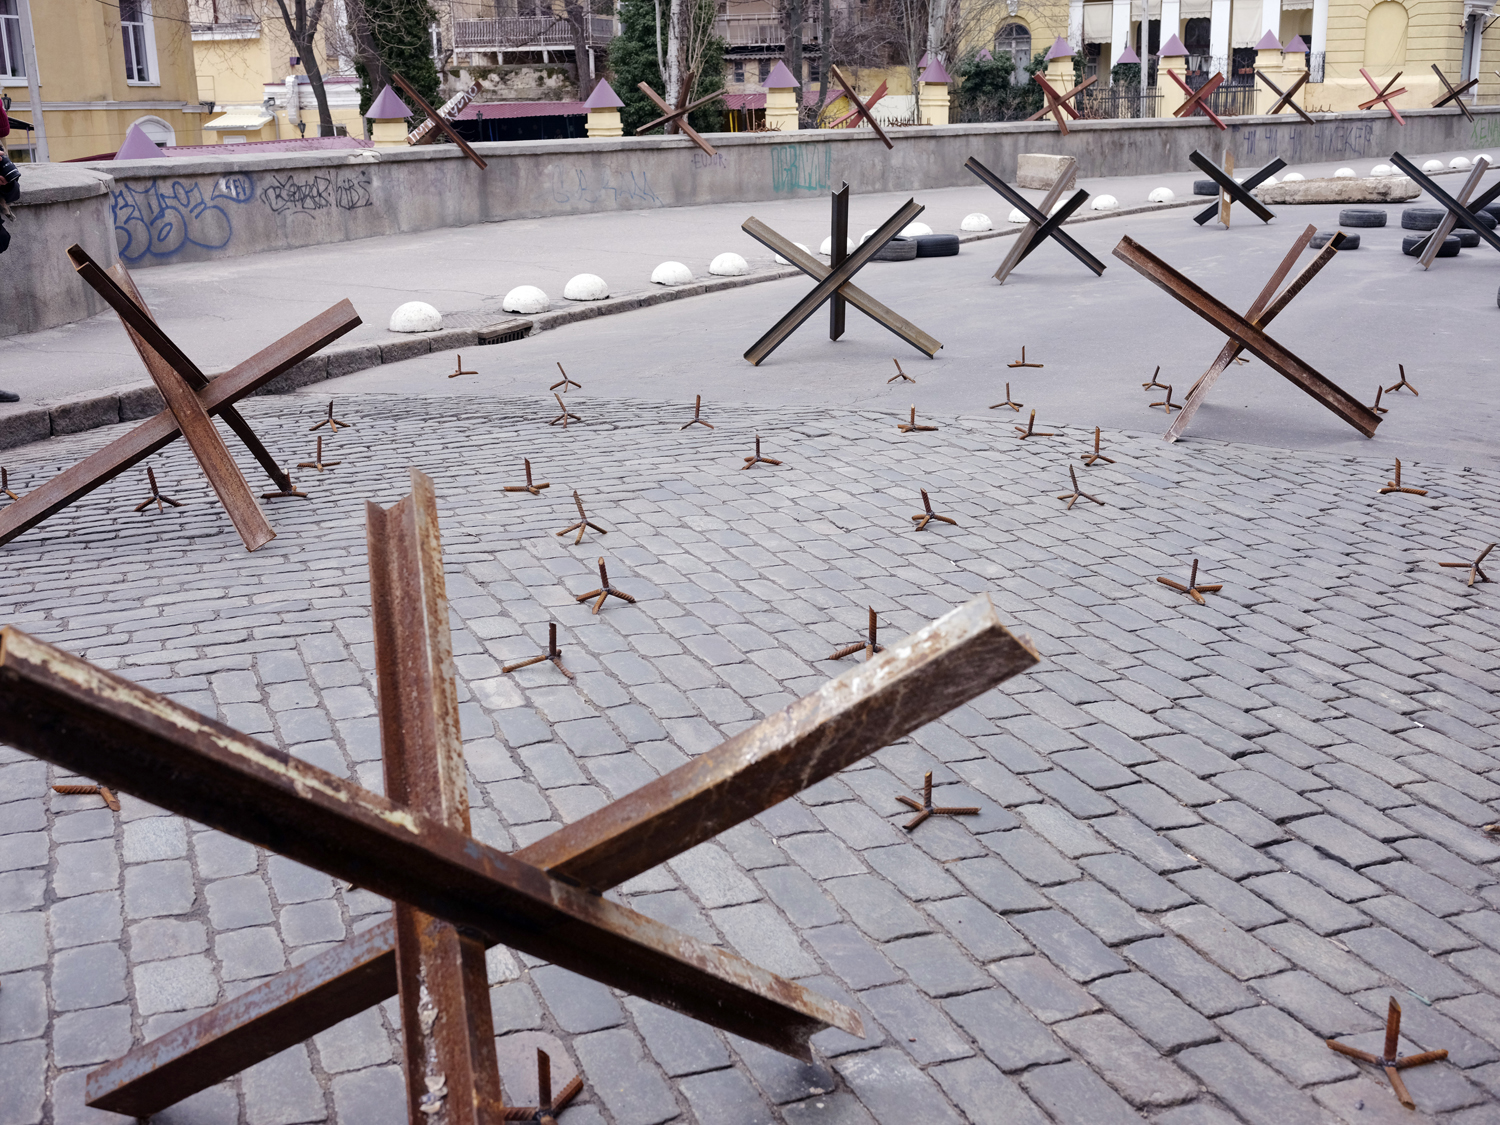 Odesa, Ukraine 03/14/2022The center of Odesa shows the signs of measure the military are taking to defend the city from Russian forces. Steel anti tank {quote}hedgehogs{quote} litter many of the main streets leading to central Odesa. Jehad Nga